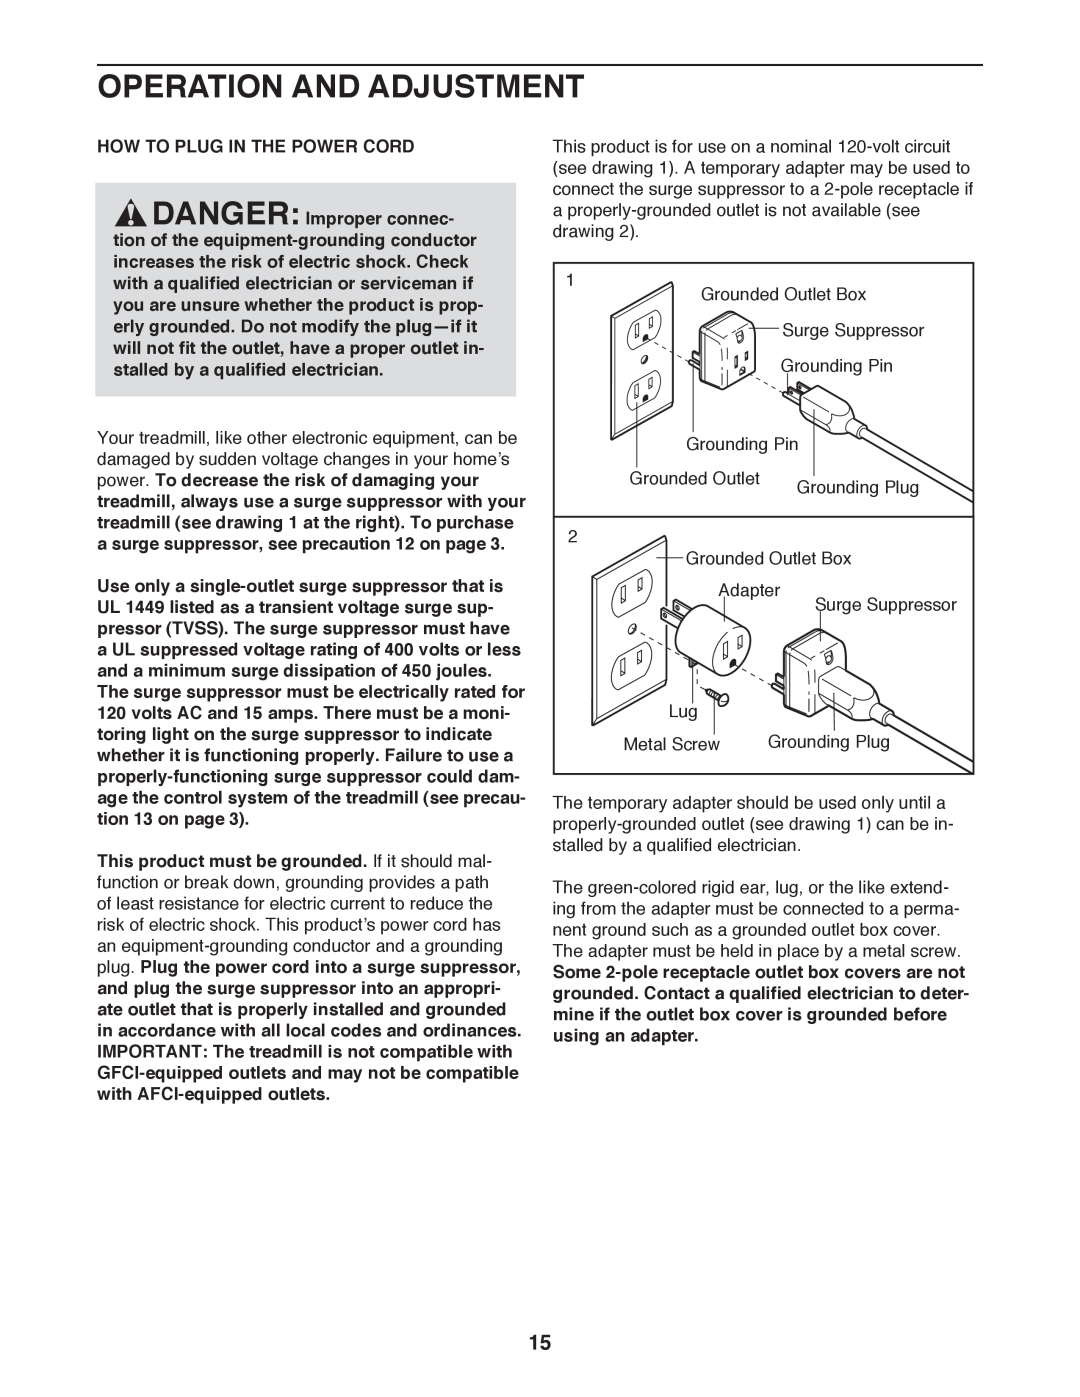 ProForm 795 user manual Operation And Adjustment, How To Plug In The Power Cord 